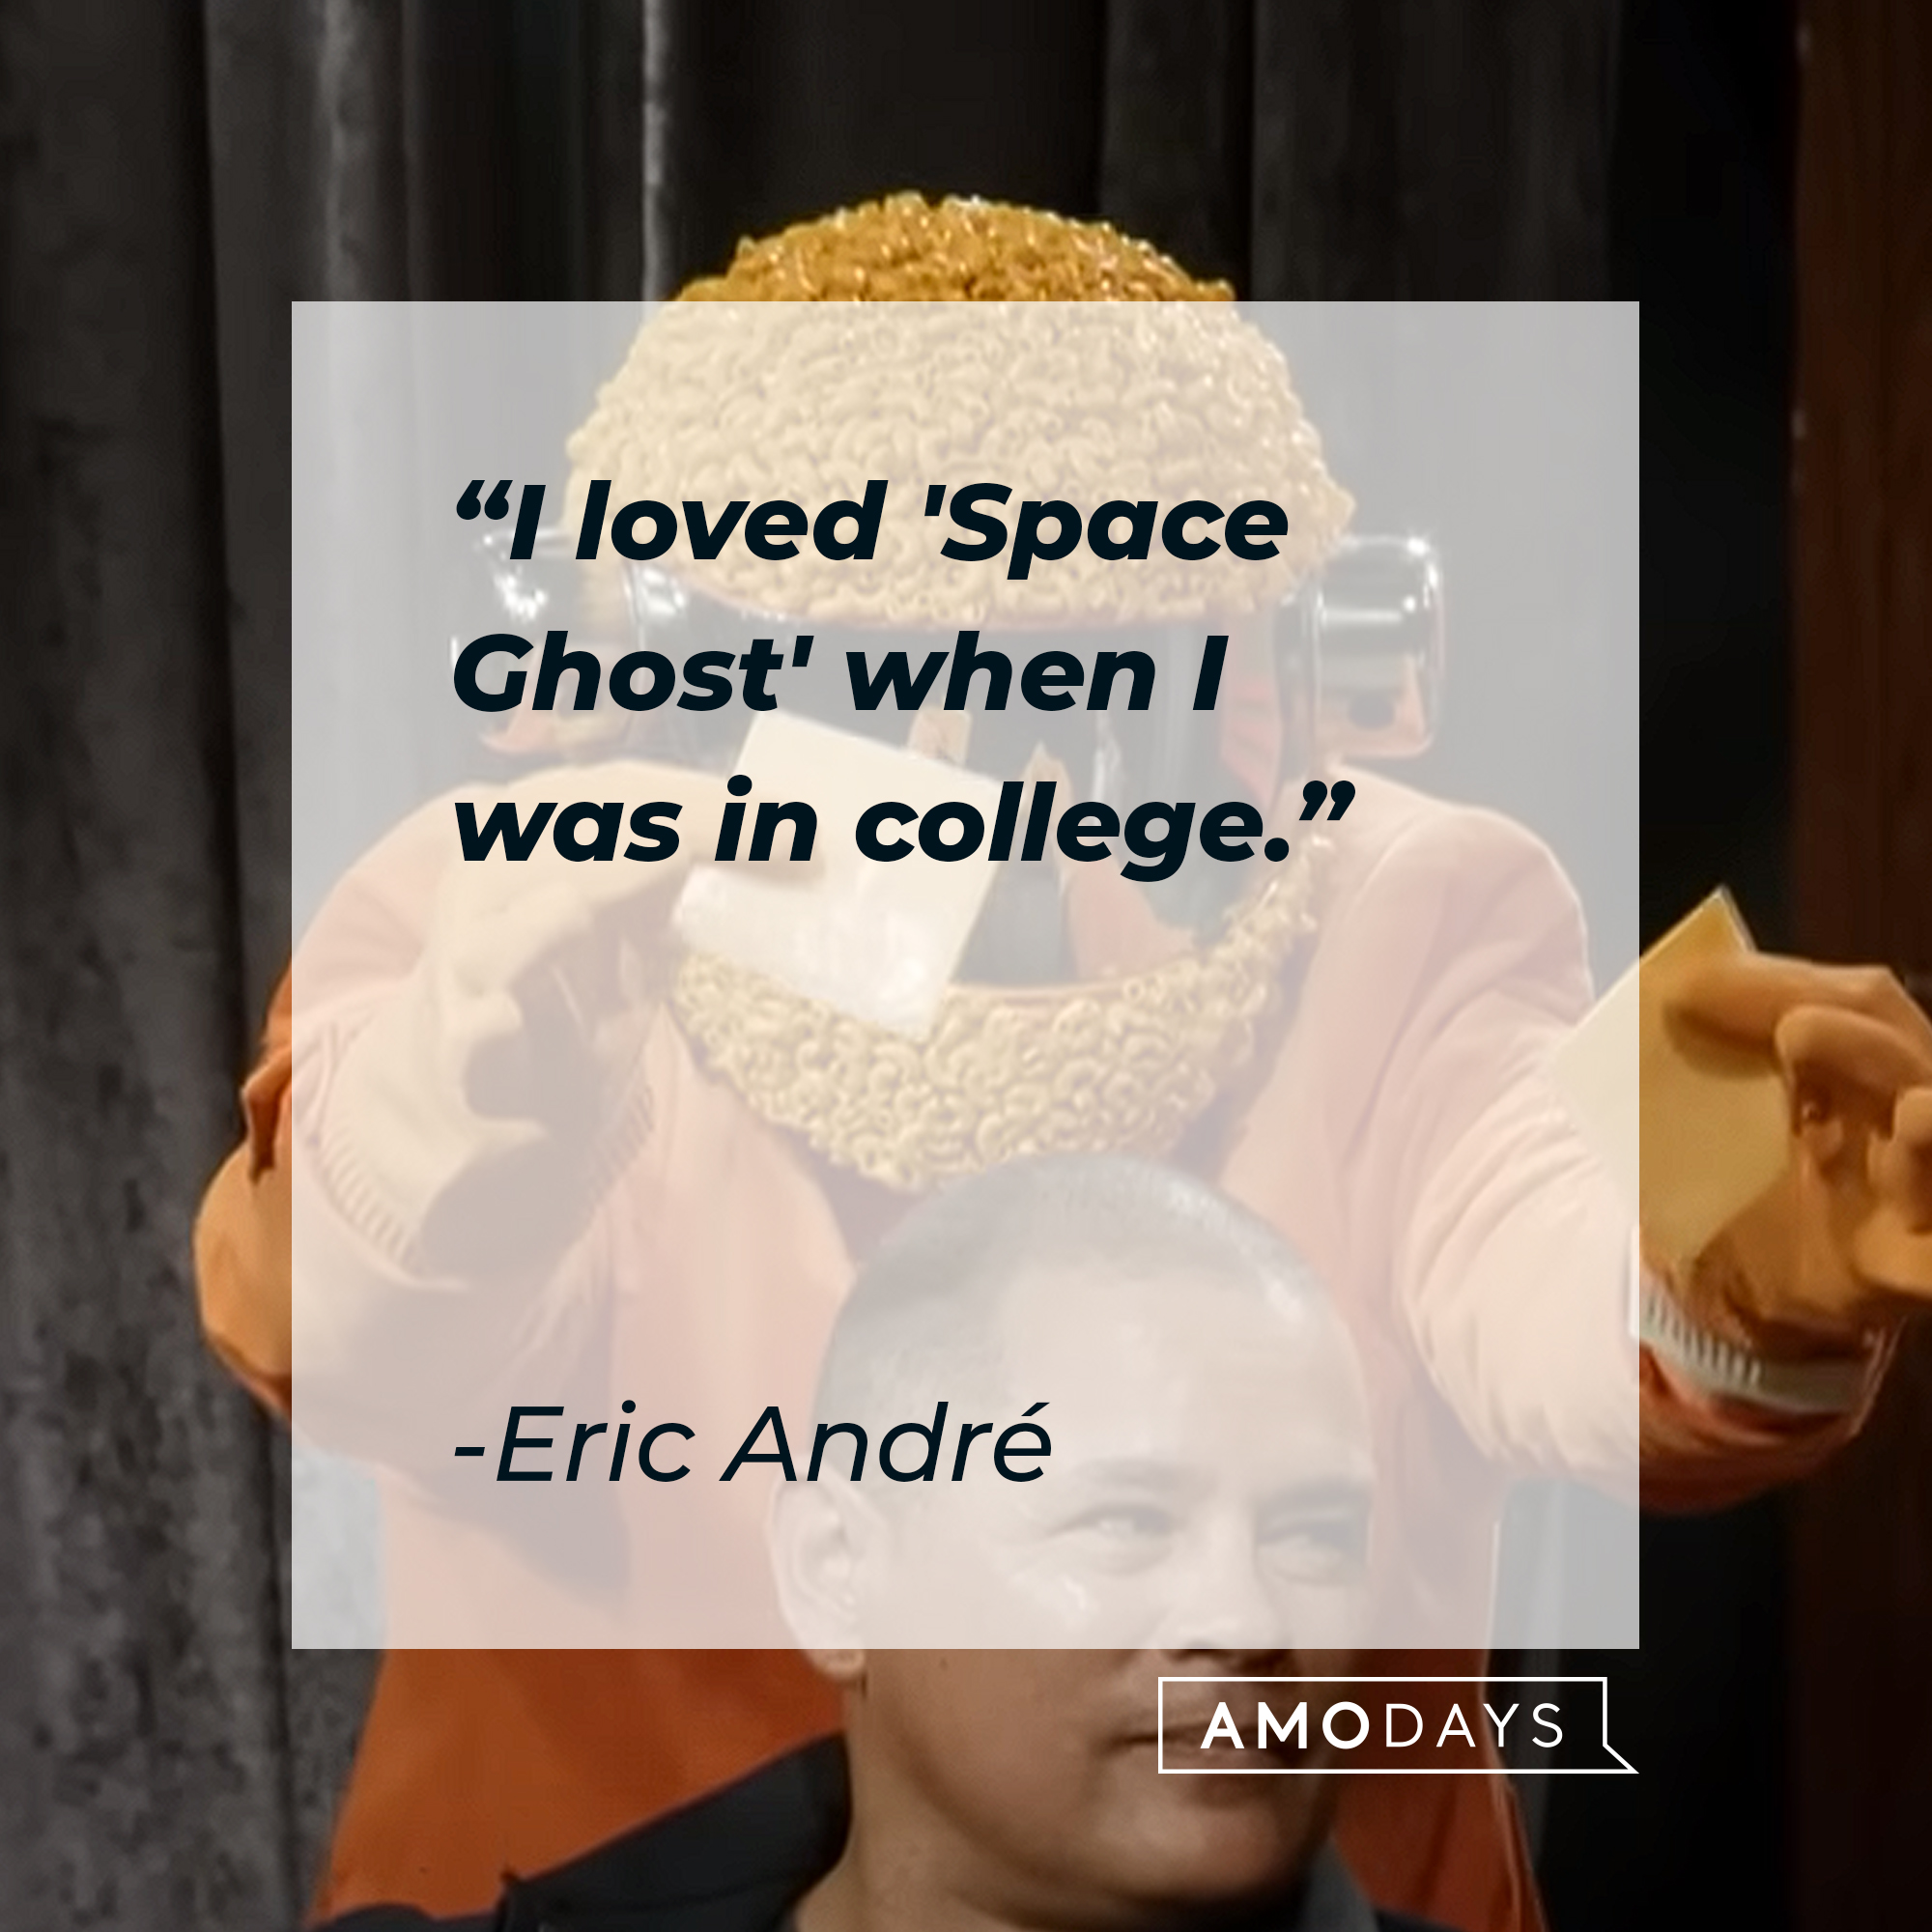 Eric André's quote: "I loved 'Space Ghost' when I was in college." | Source: Youtube.com/adultswim